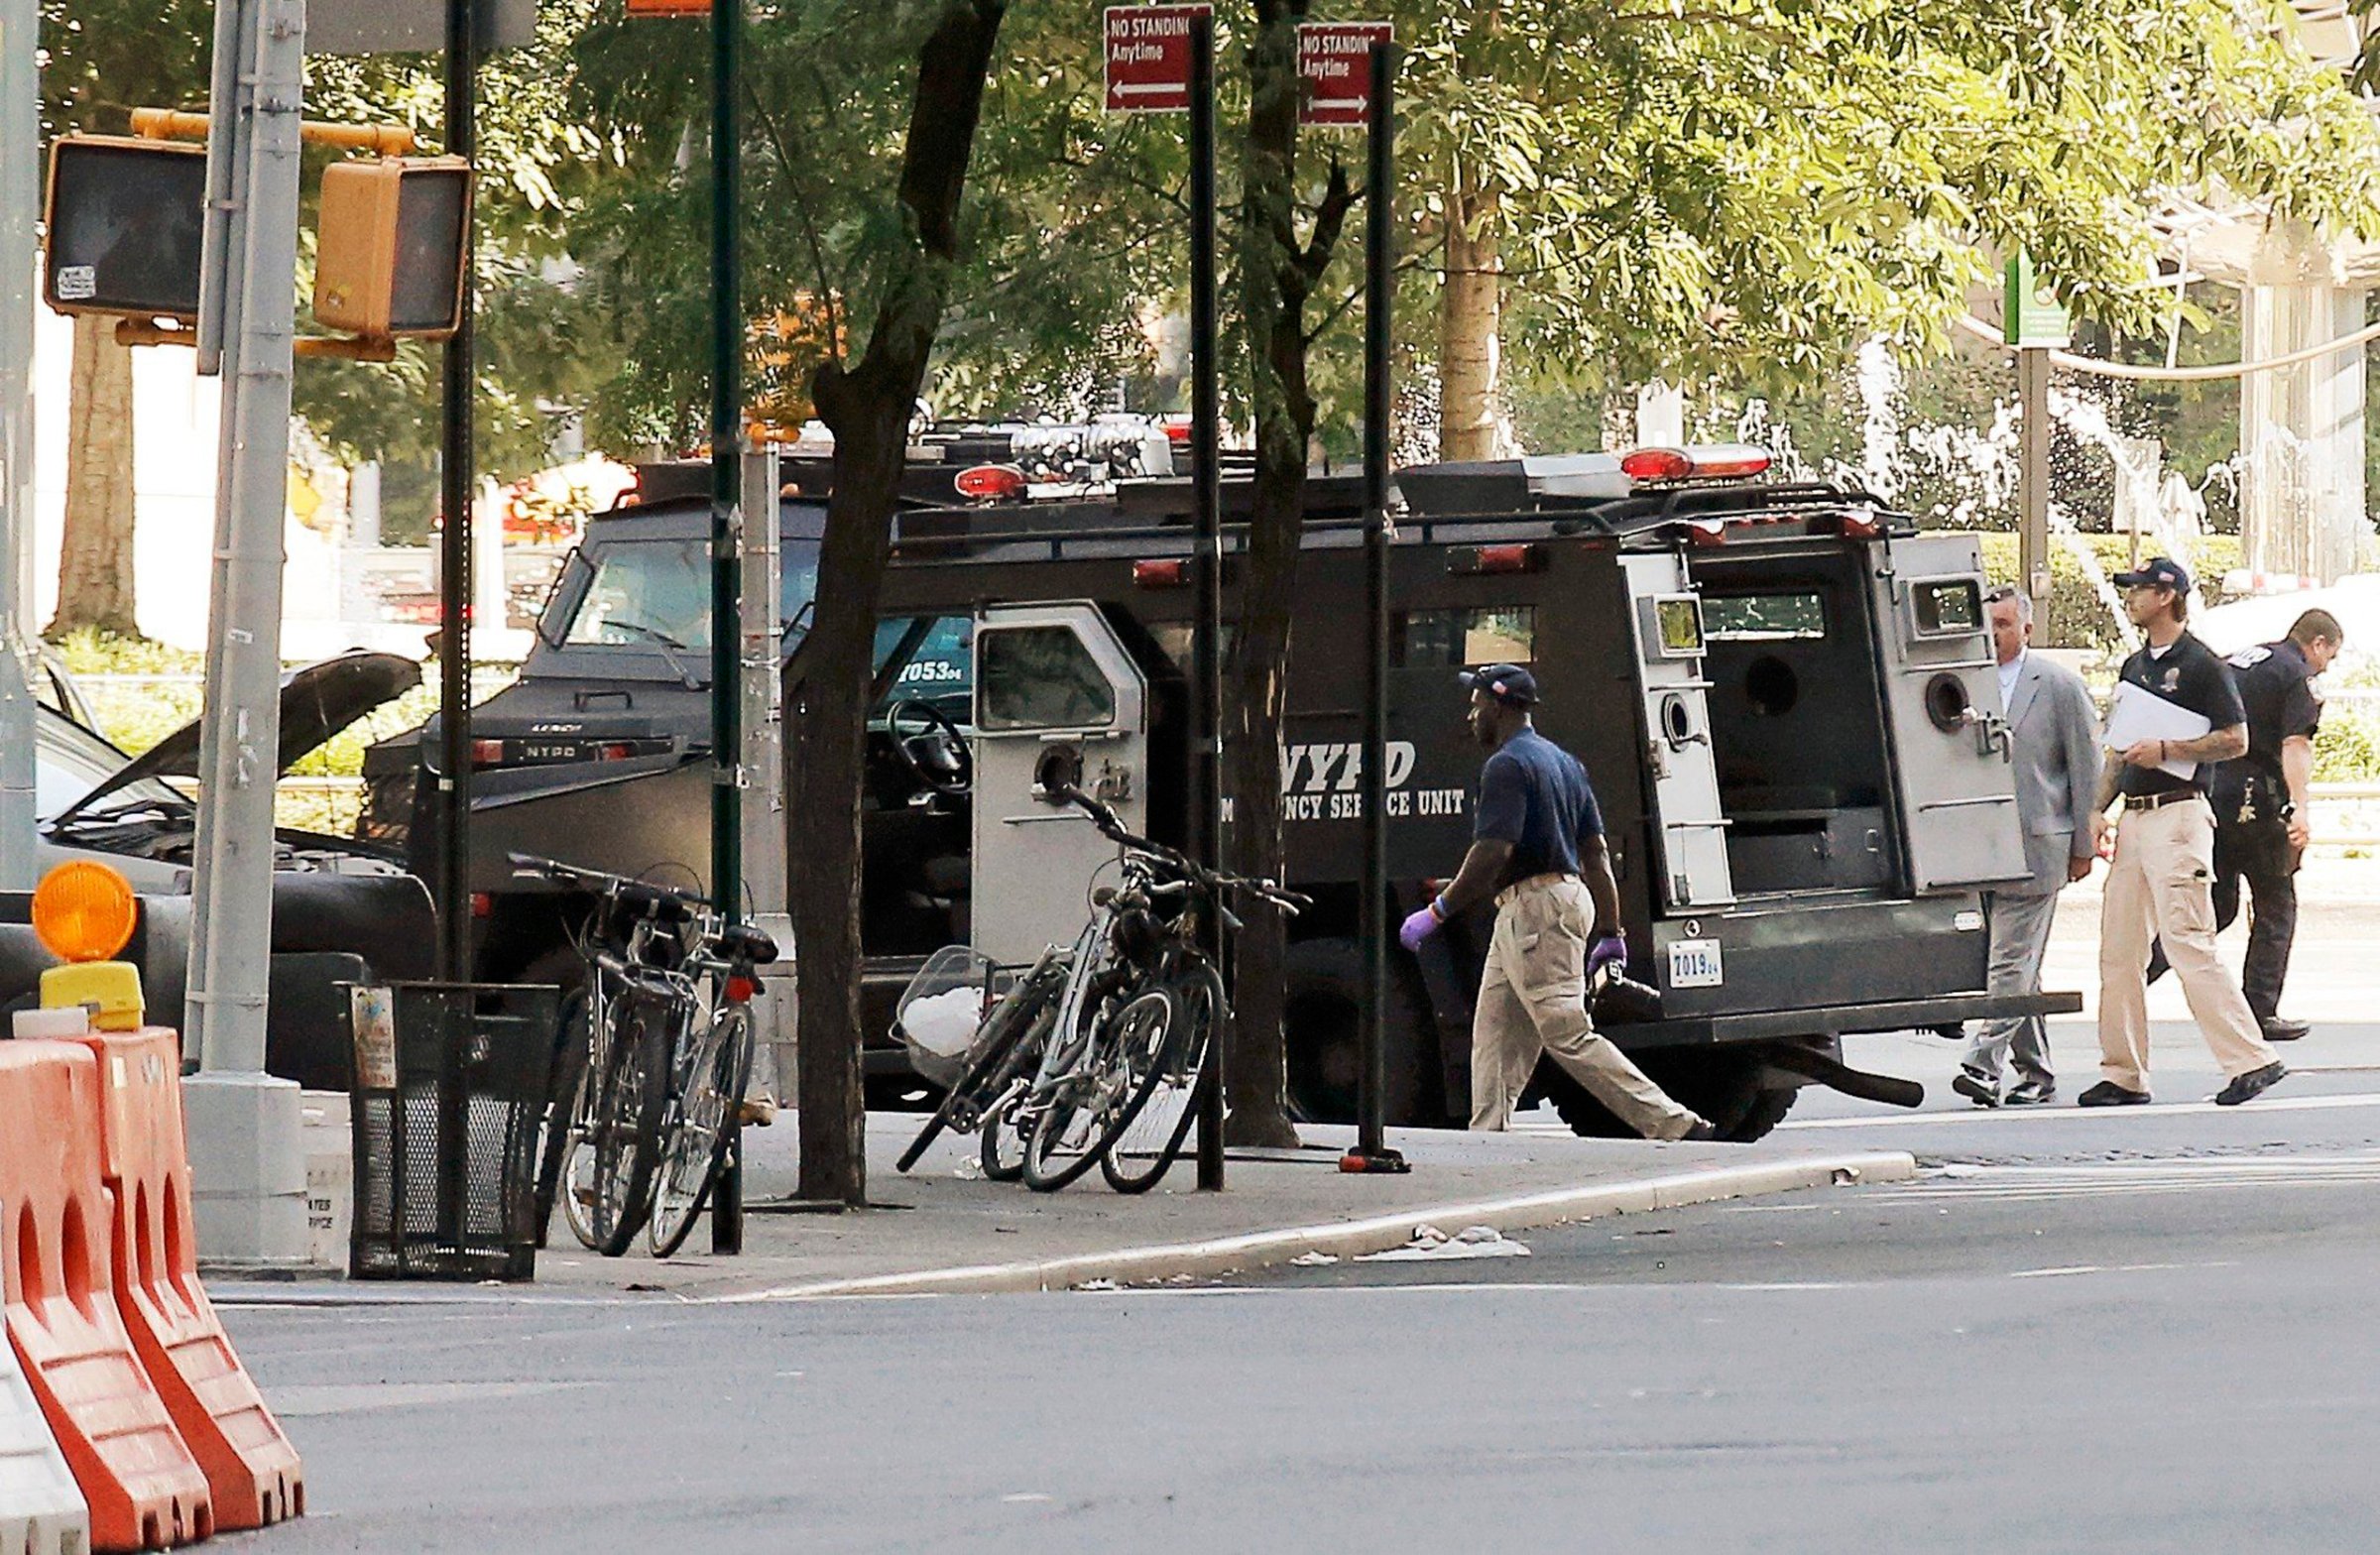 Police investigate the scene near an SUV in which a man suspected of causing a bomb scare barricaded himself, causing an hours-long standoff and the shutdown of a mid-Manhattan area in New York City on July 21, 2016.